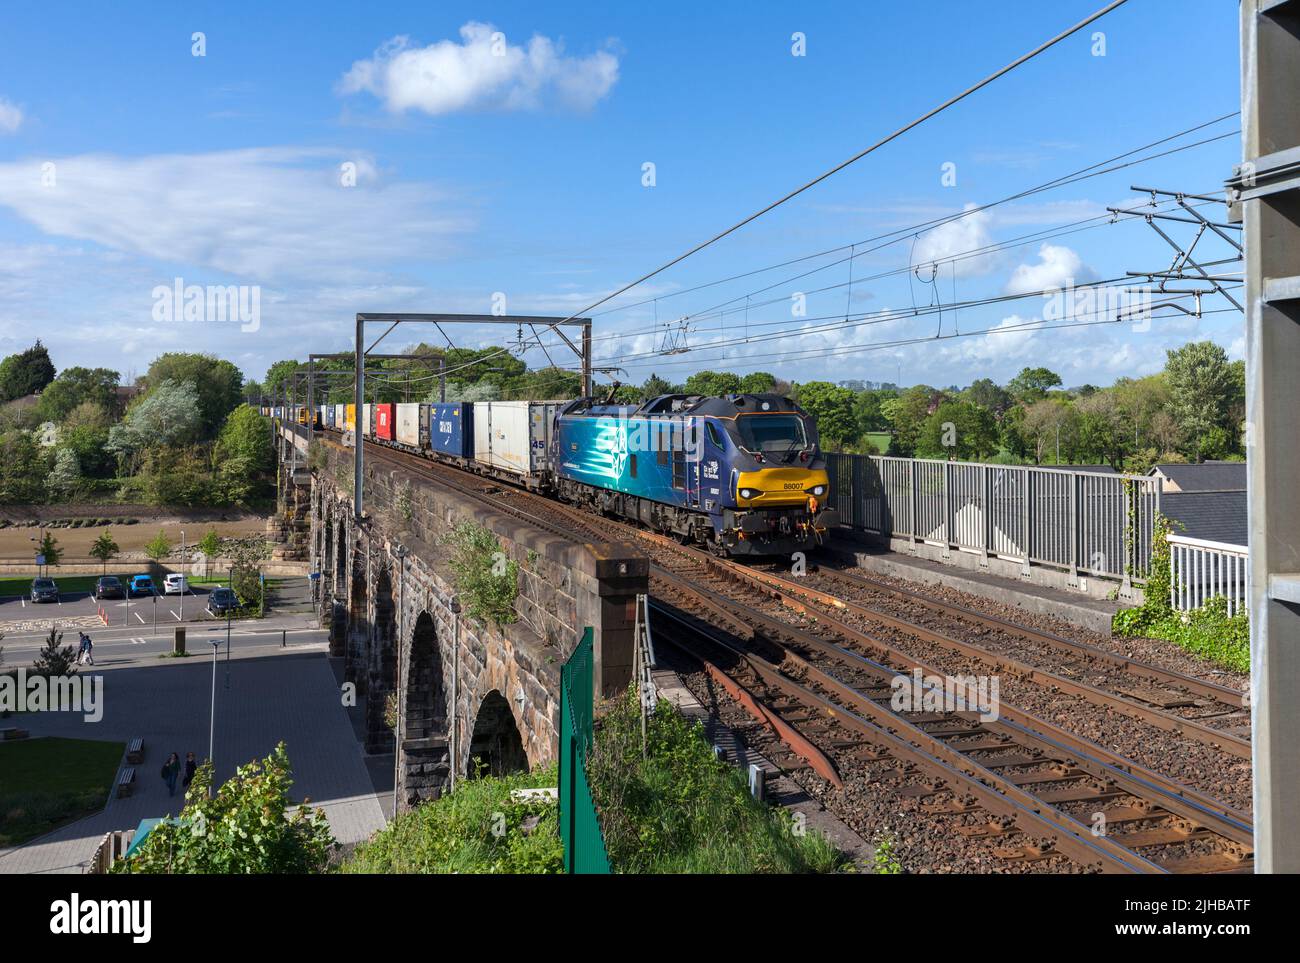 Direct rail Services class 88 locomotive 88007 hauling an intermodal container freight train on the west coast mainline at Lancaster Stock Photo